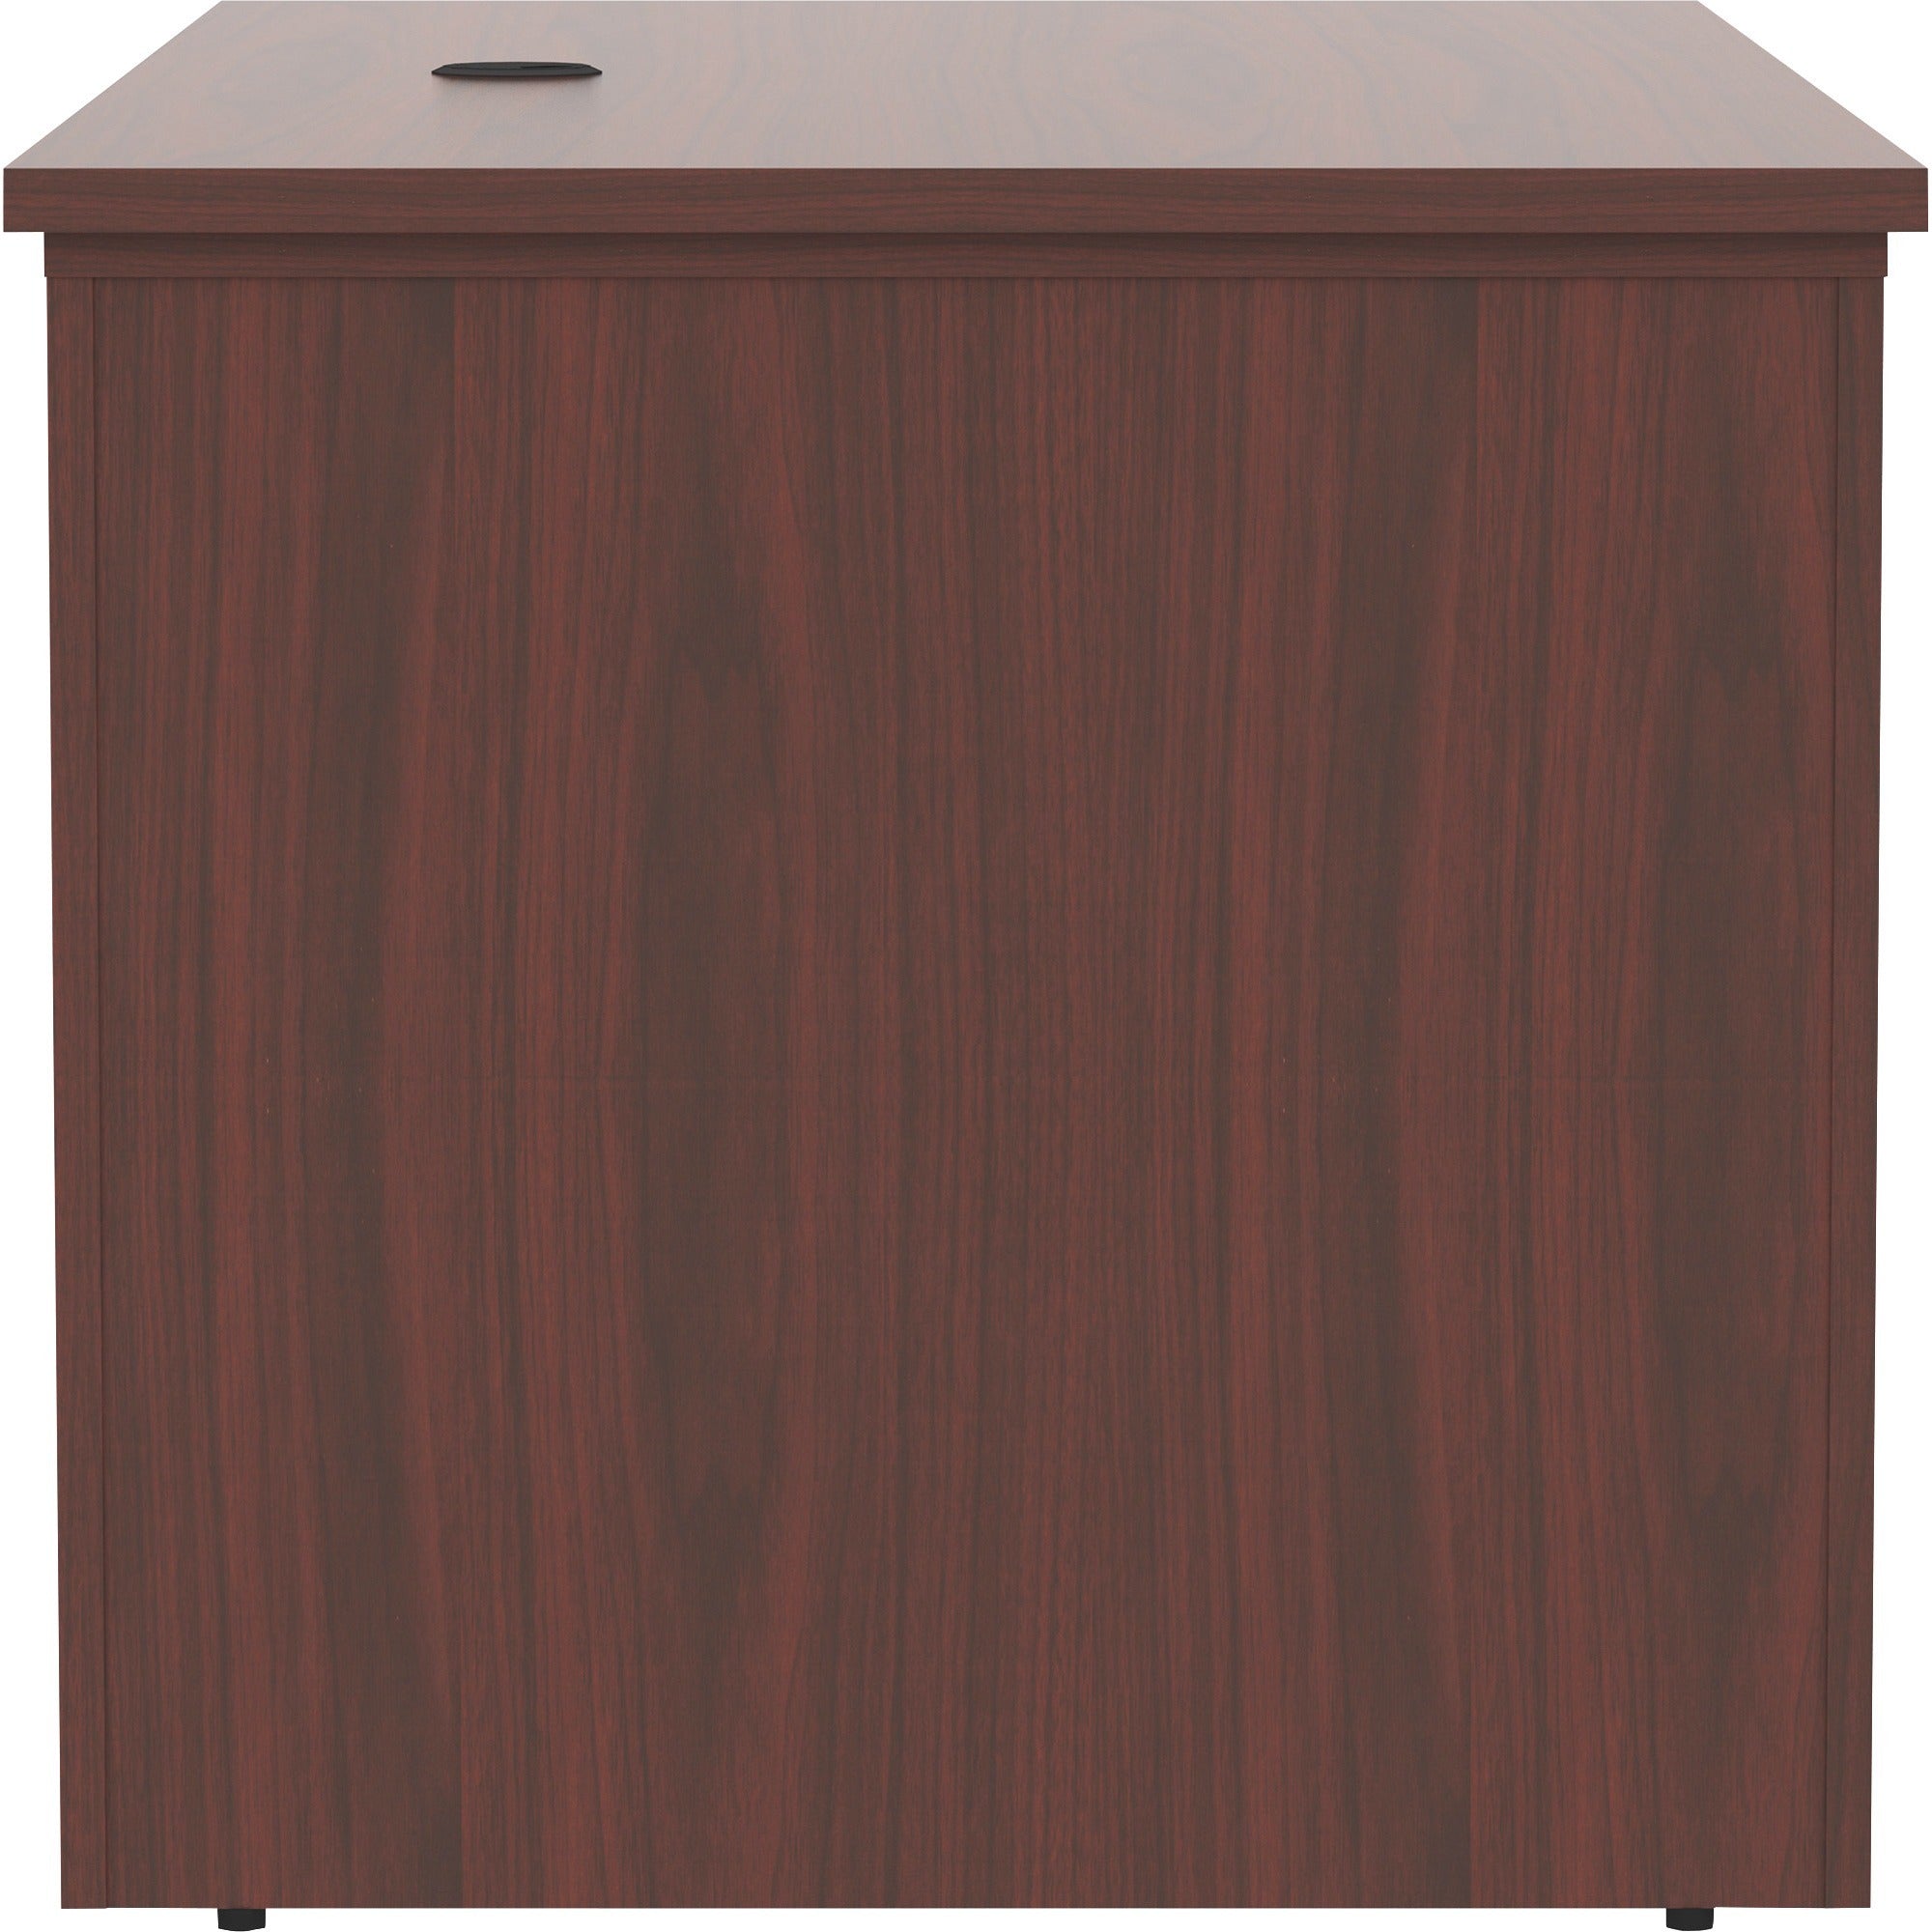 lorell-essentials-series-sit-to-stand-desk-shell-01-top-1-edge-60-x-2949-finish-mahogany-mahogany-laminate-table-top_llr69571 - 3